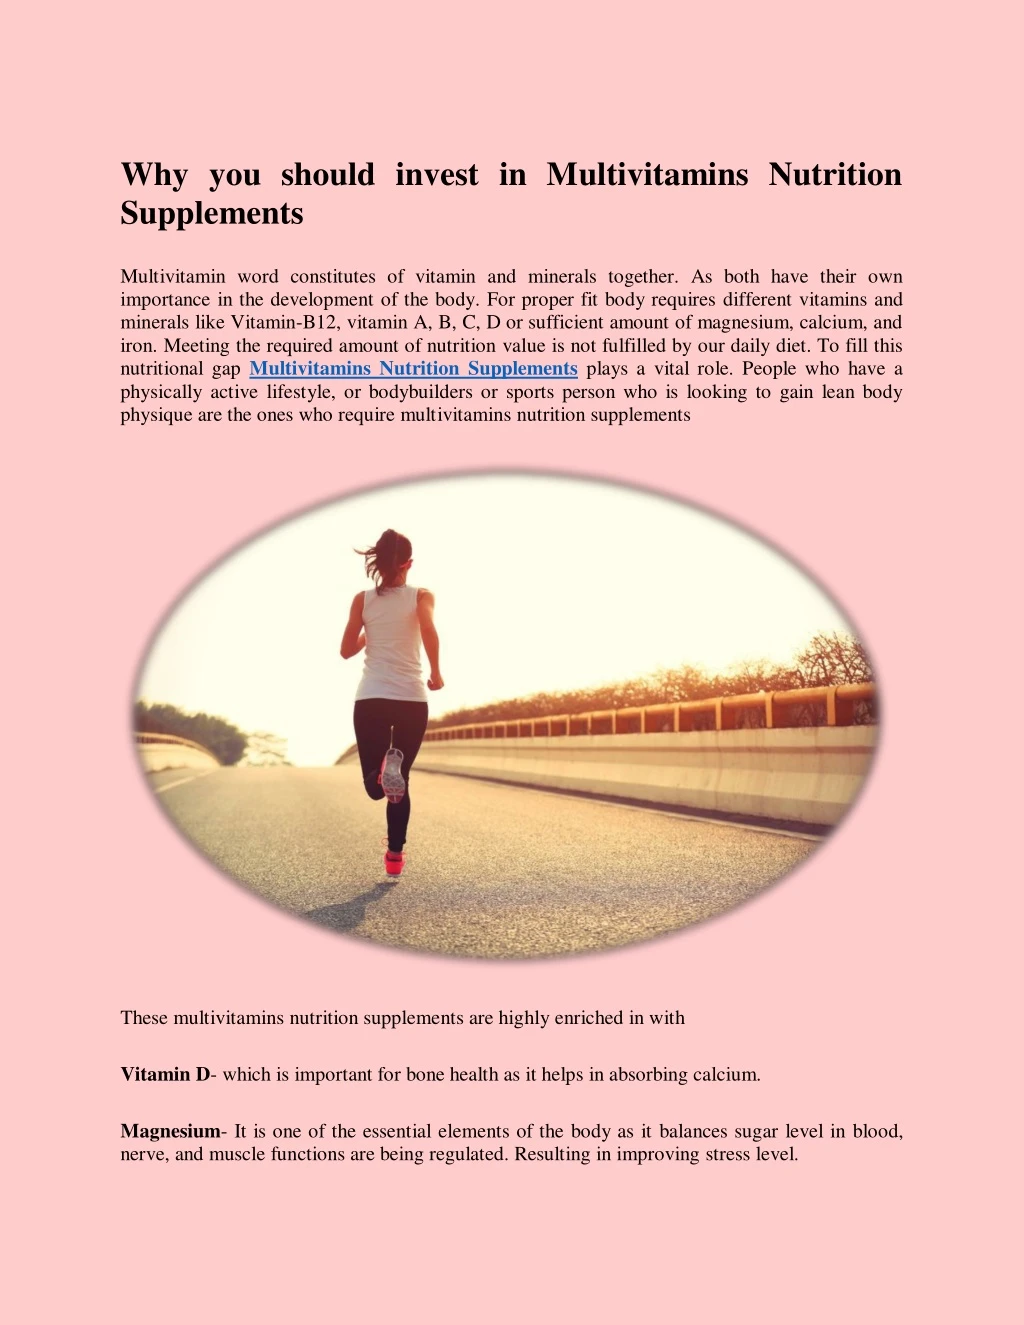 why you should invest in multivitamins nutrition